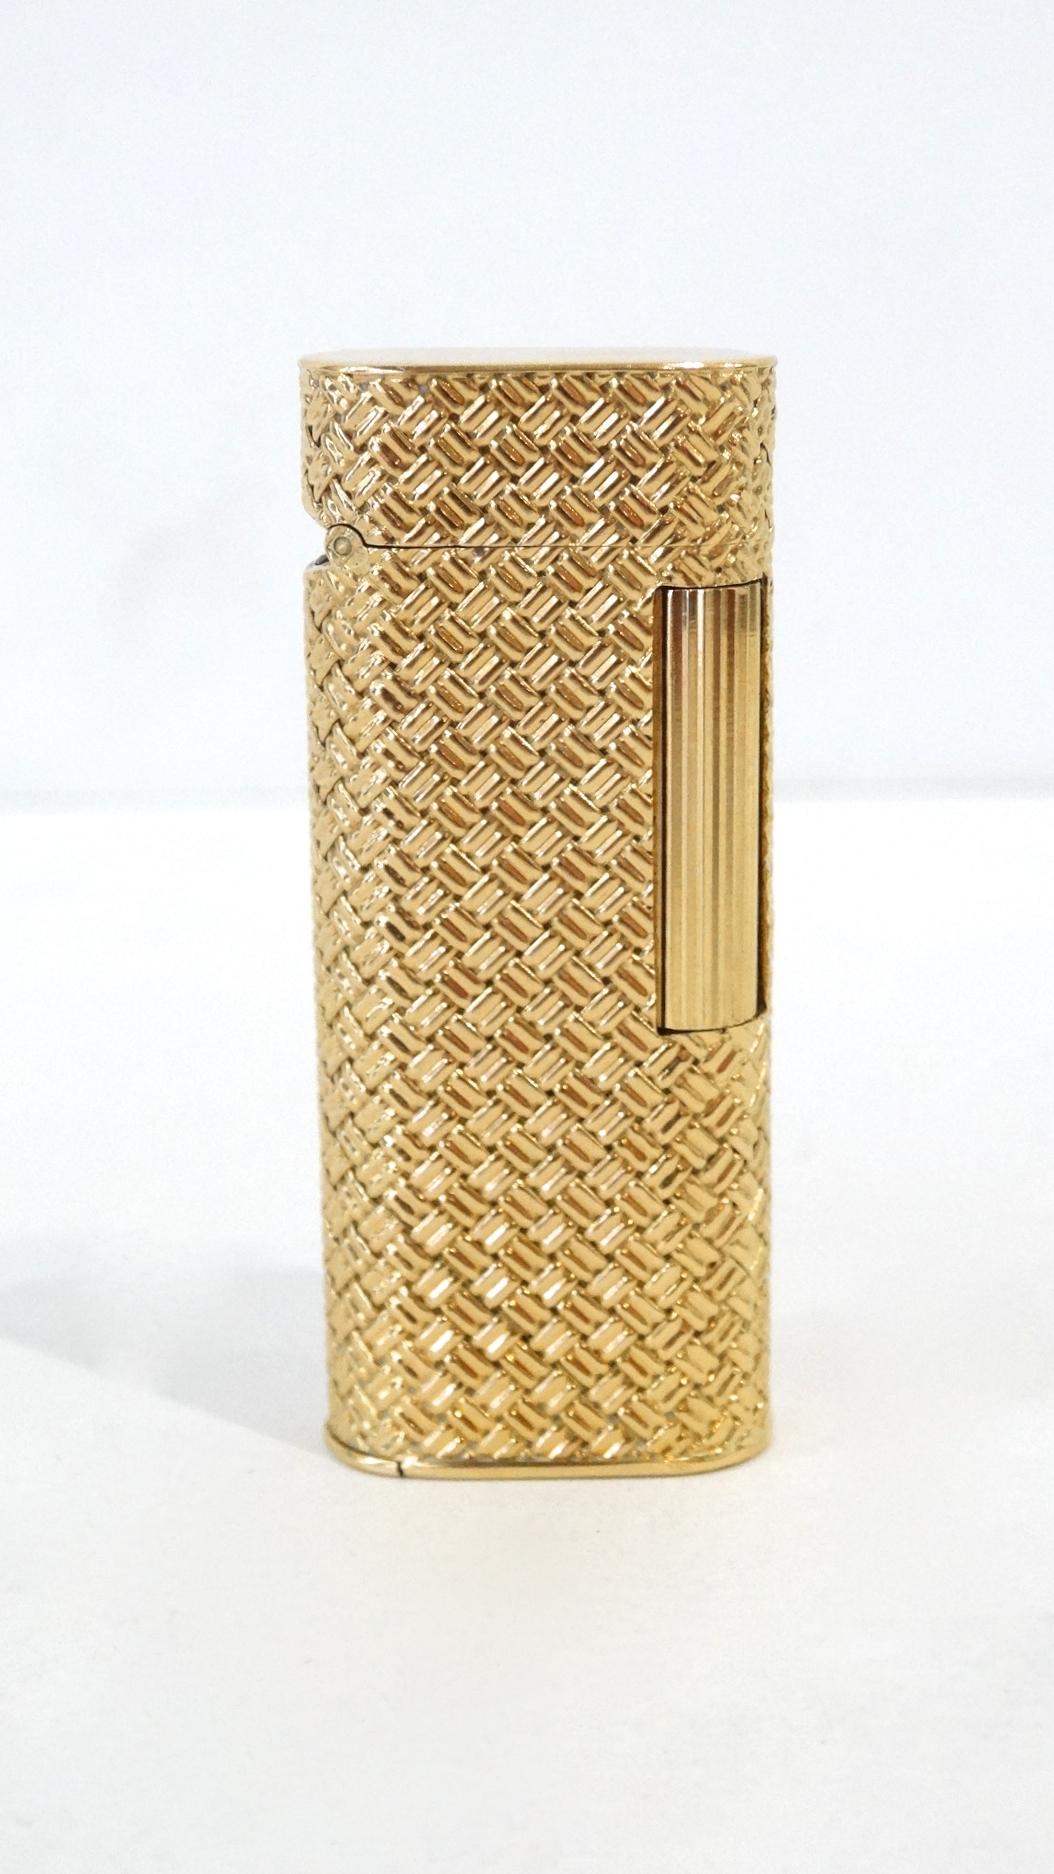 Rare 1970s Dunhill for Van Cleef & Arpels 18K Gold gas lighter. Features a woven basket pattern, new flint and flip top. Stamped Dunhill/ Van Cleef & Arpels, serial number 100247 and 750 for solid 18K Gold. Great working condition. Total weight 89